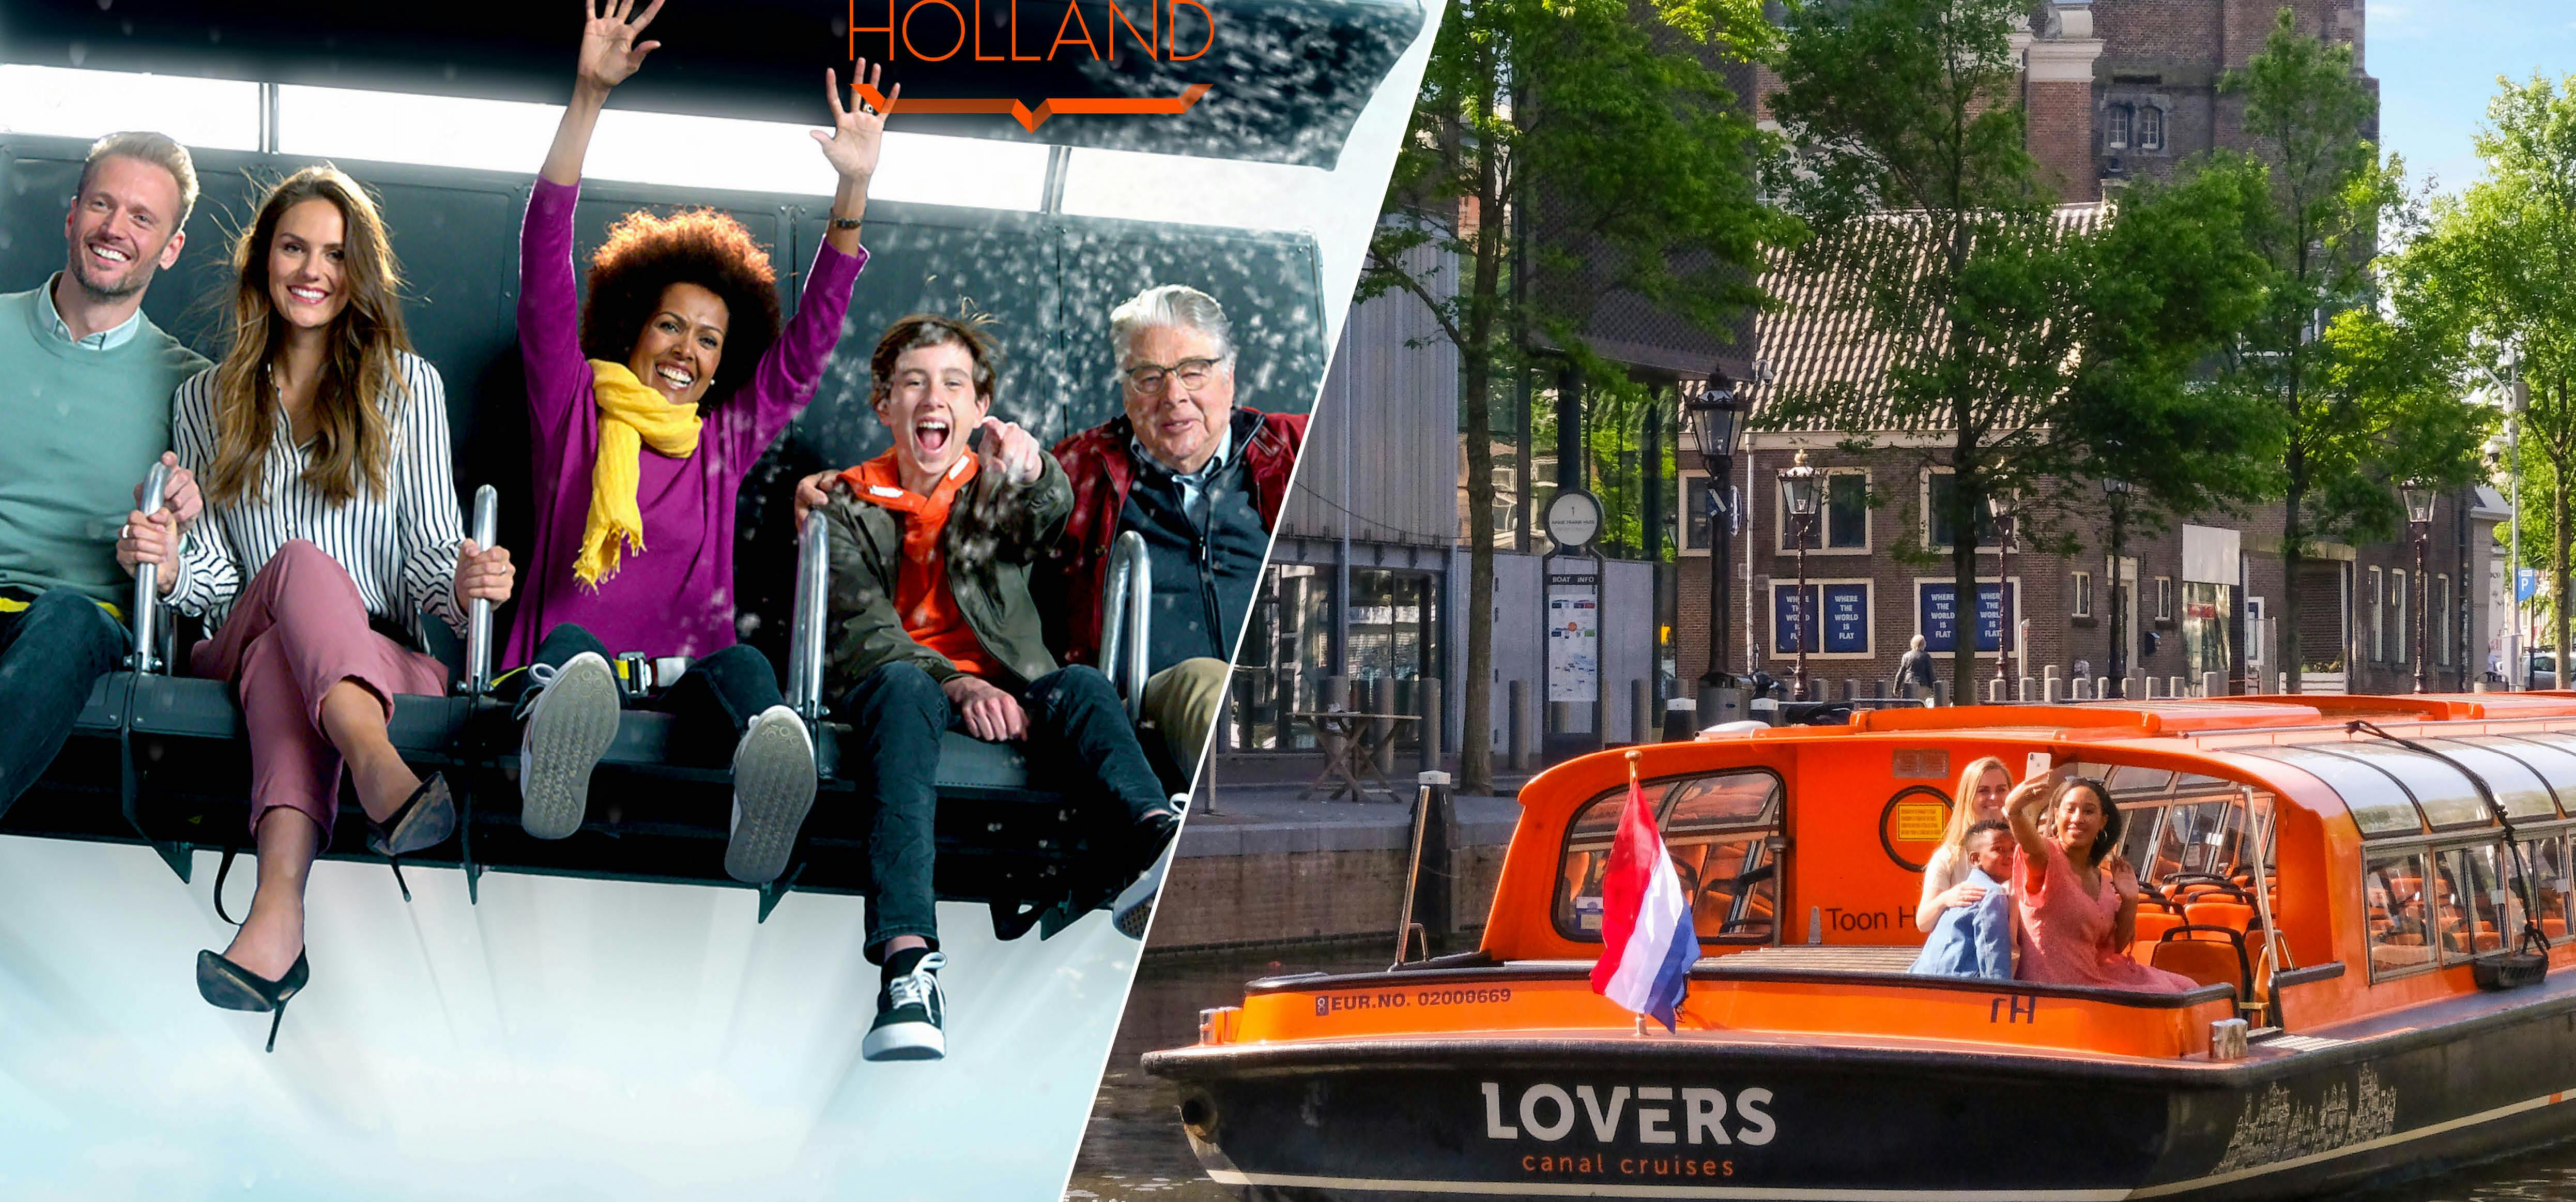 This is Holland tickets and 1-hour Amsterdam canal cruise